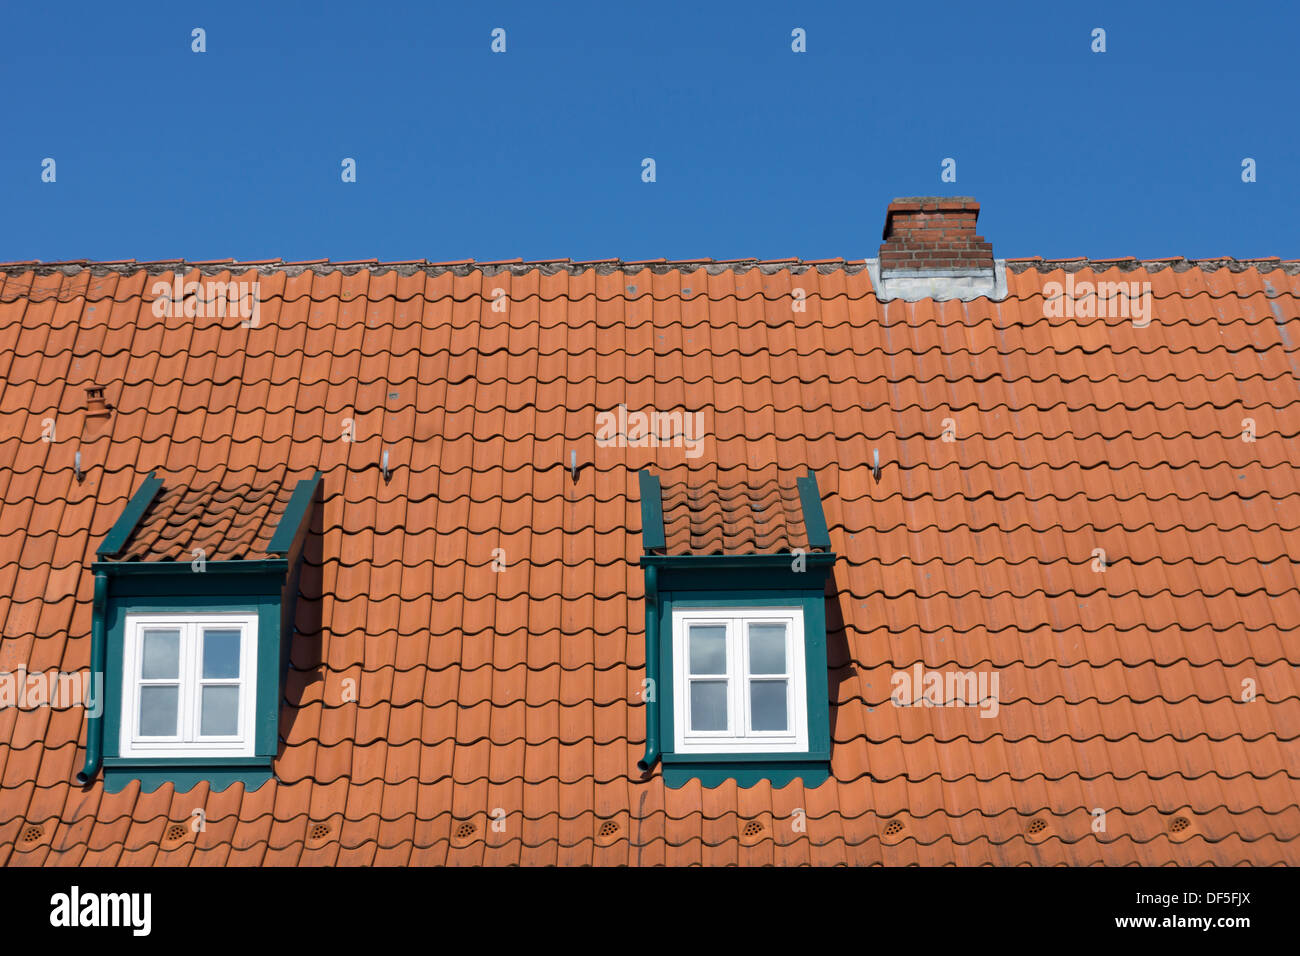 Detail of a roof Stock Photo